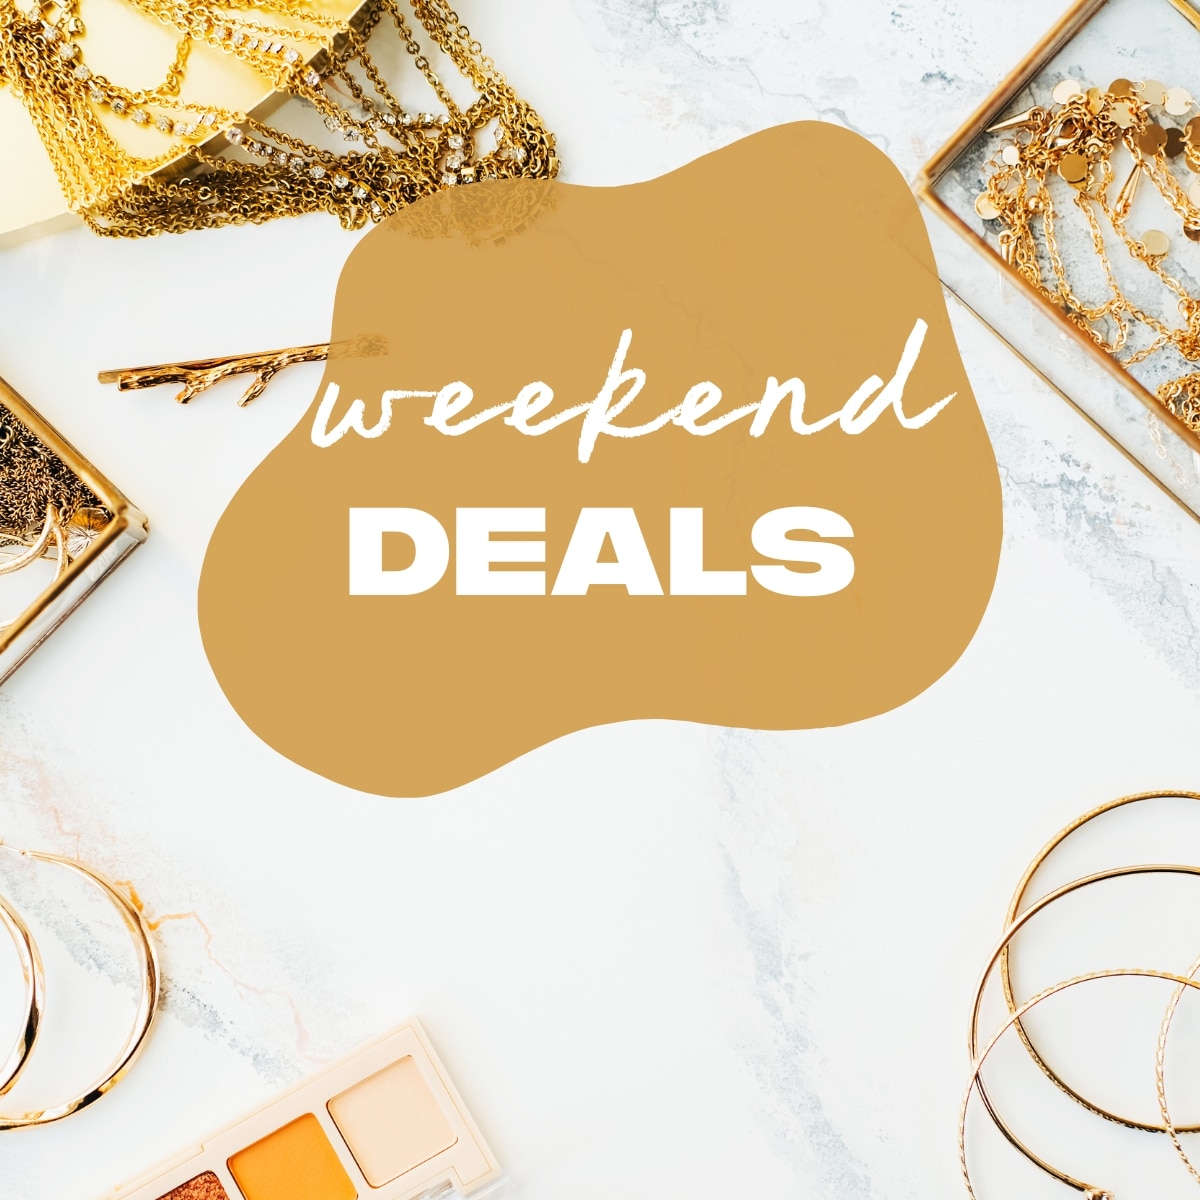 Get 60% Off a Dyson Hair Straightener, $10 BaubleBar Jewelry & More